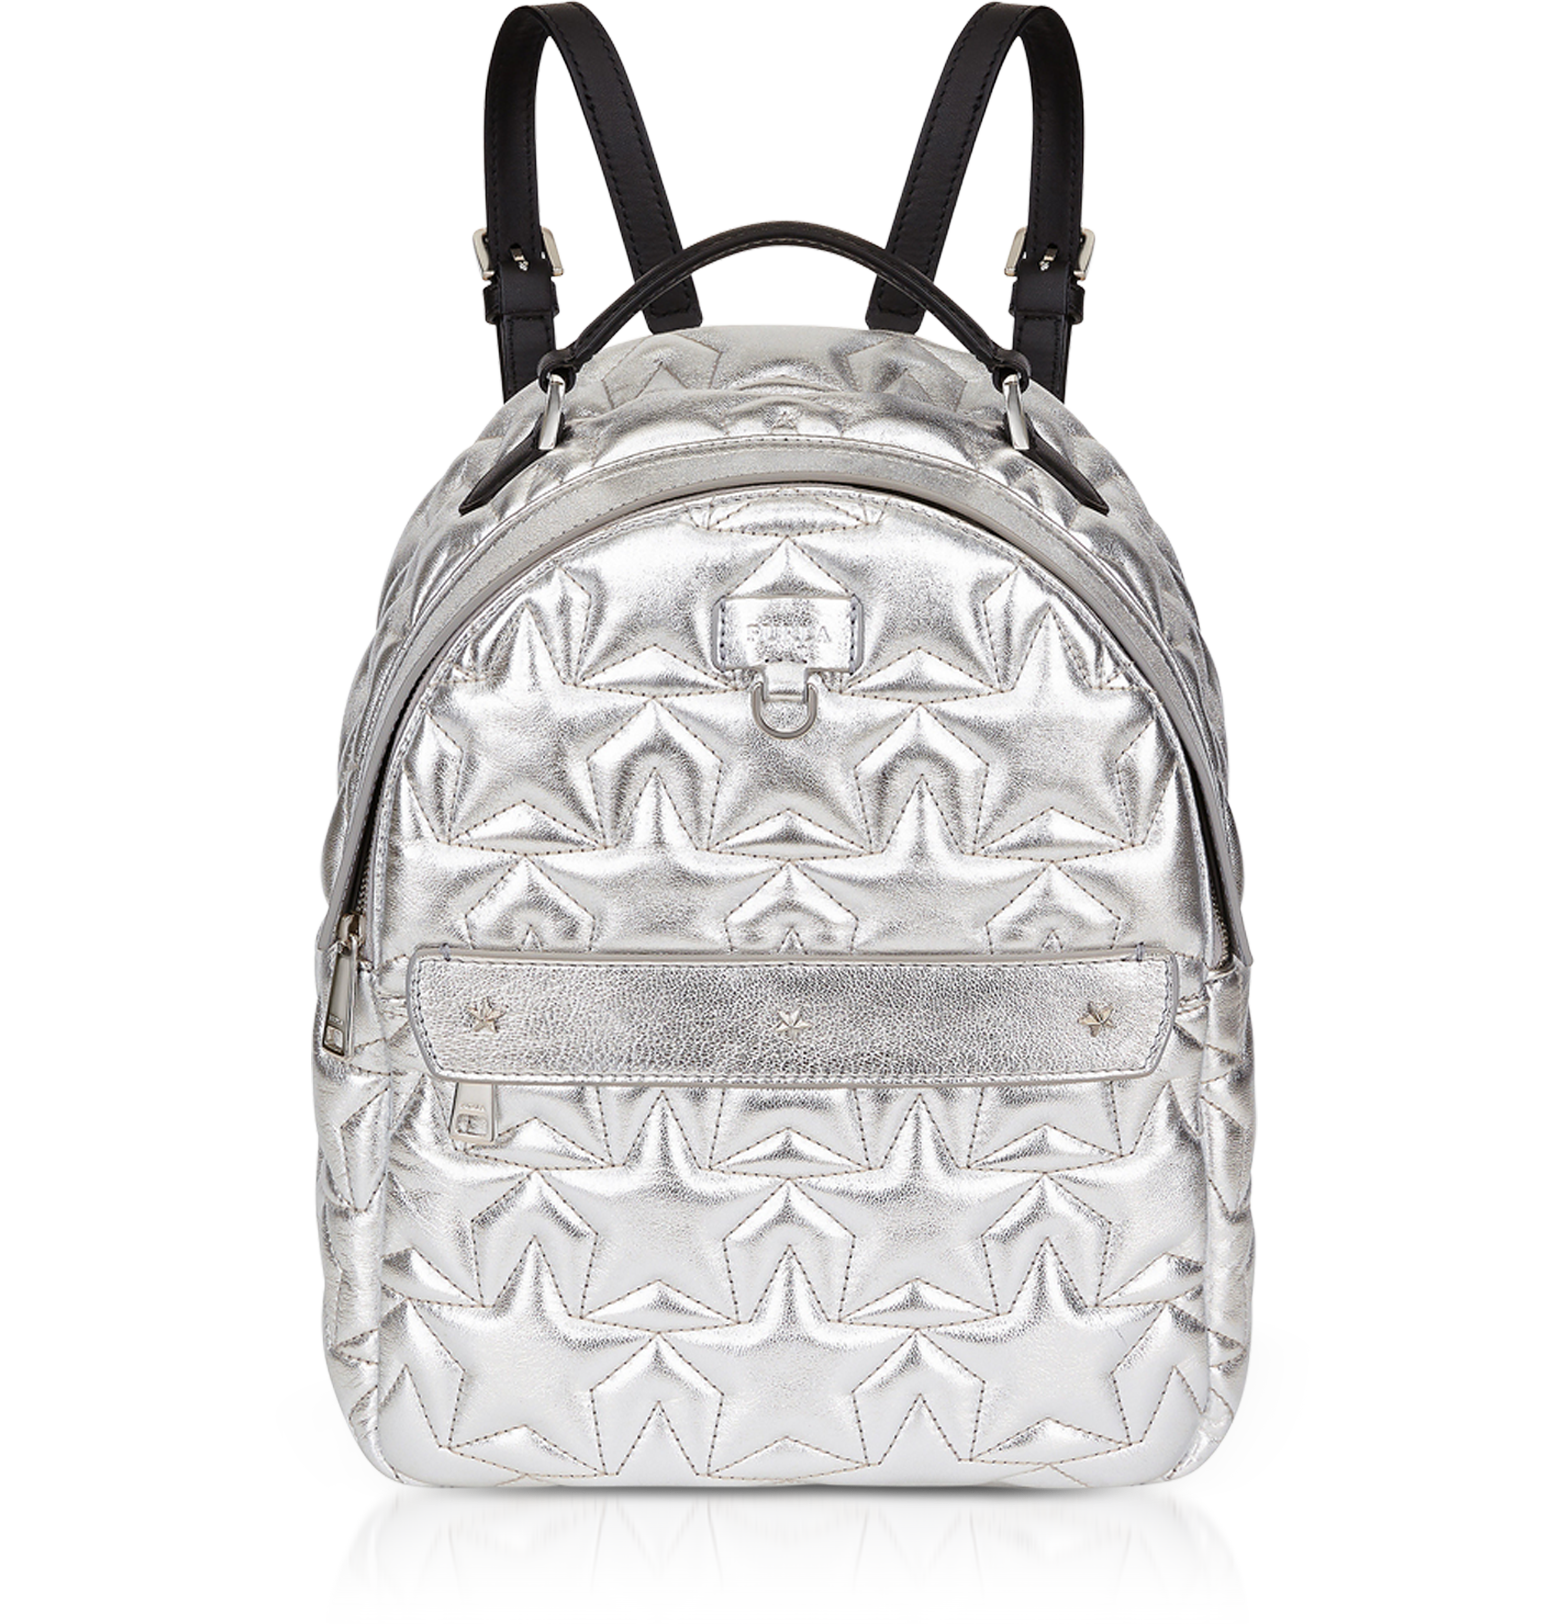 Furla Silver Star Quilted Leather Favola Small Backpack - FORZIERI